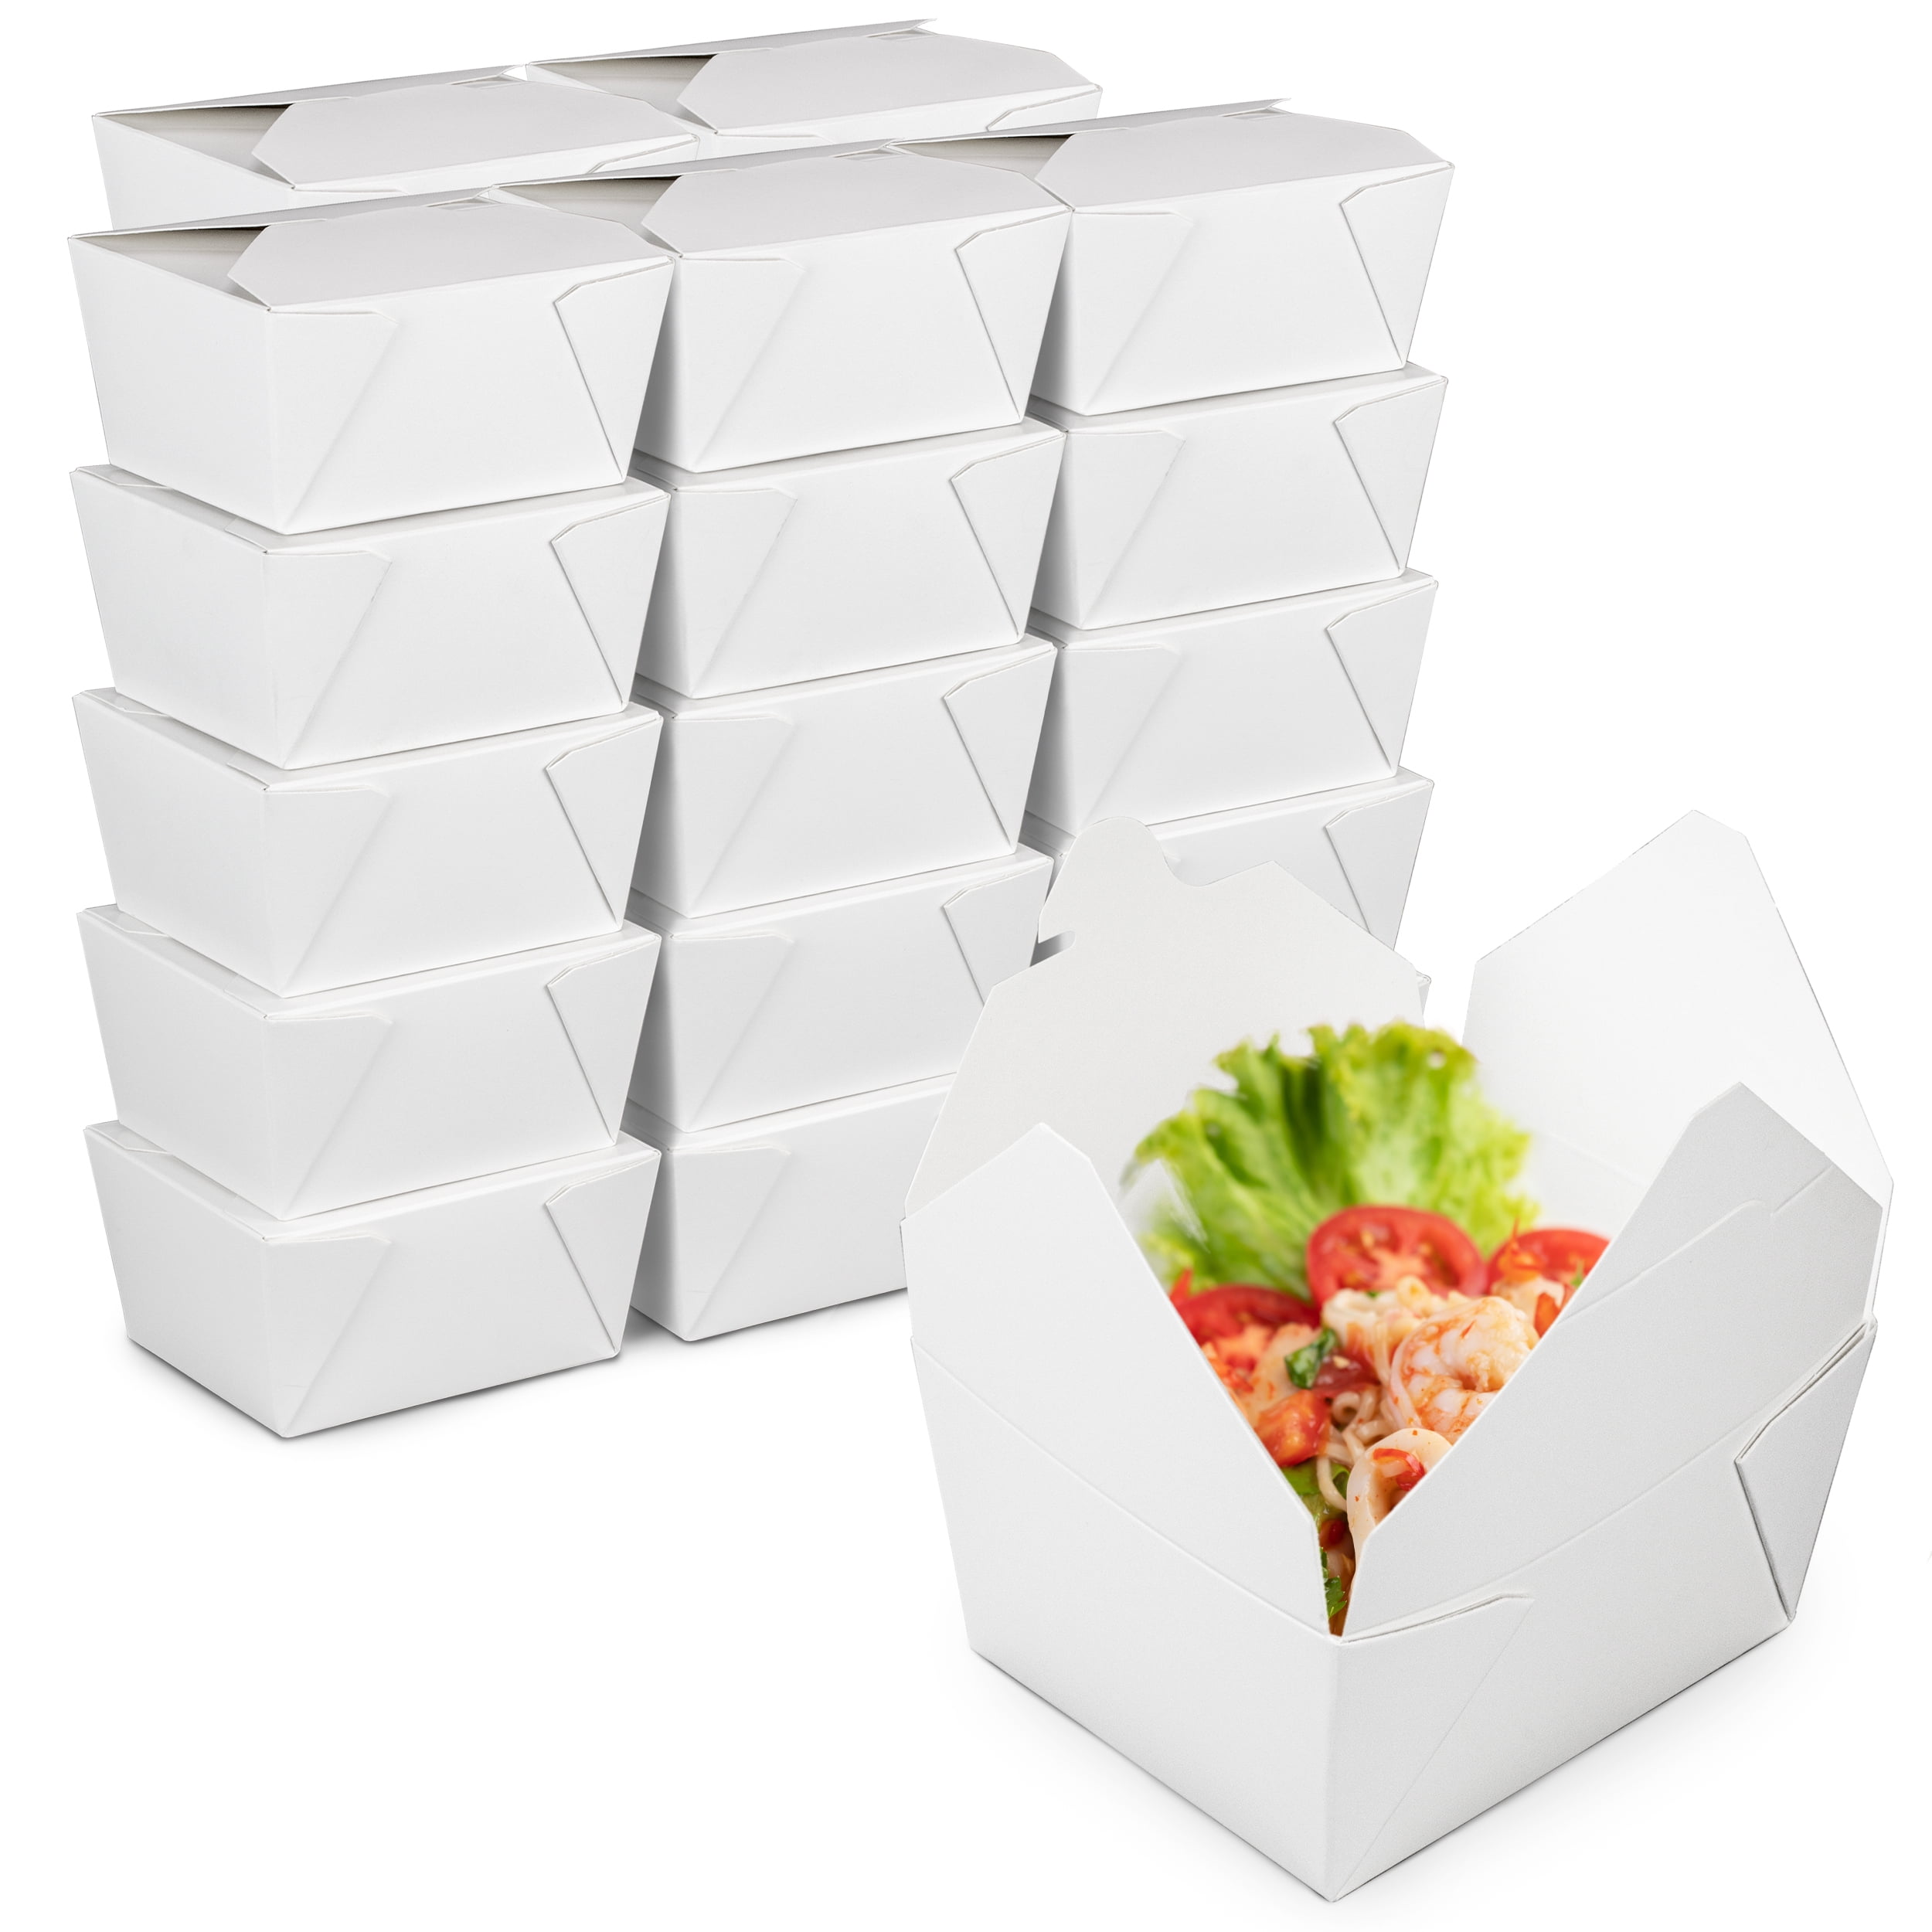 [160 Pack] 112 oz Paper Take Out Containers 8.8 x 6.5 x 3.5 inch - White Lunch Meal Food Boxes #4, Disposable Storage to Go Packaging, Microwave Safe